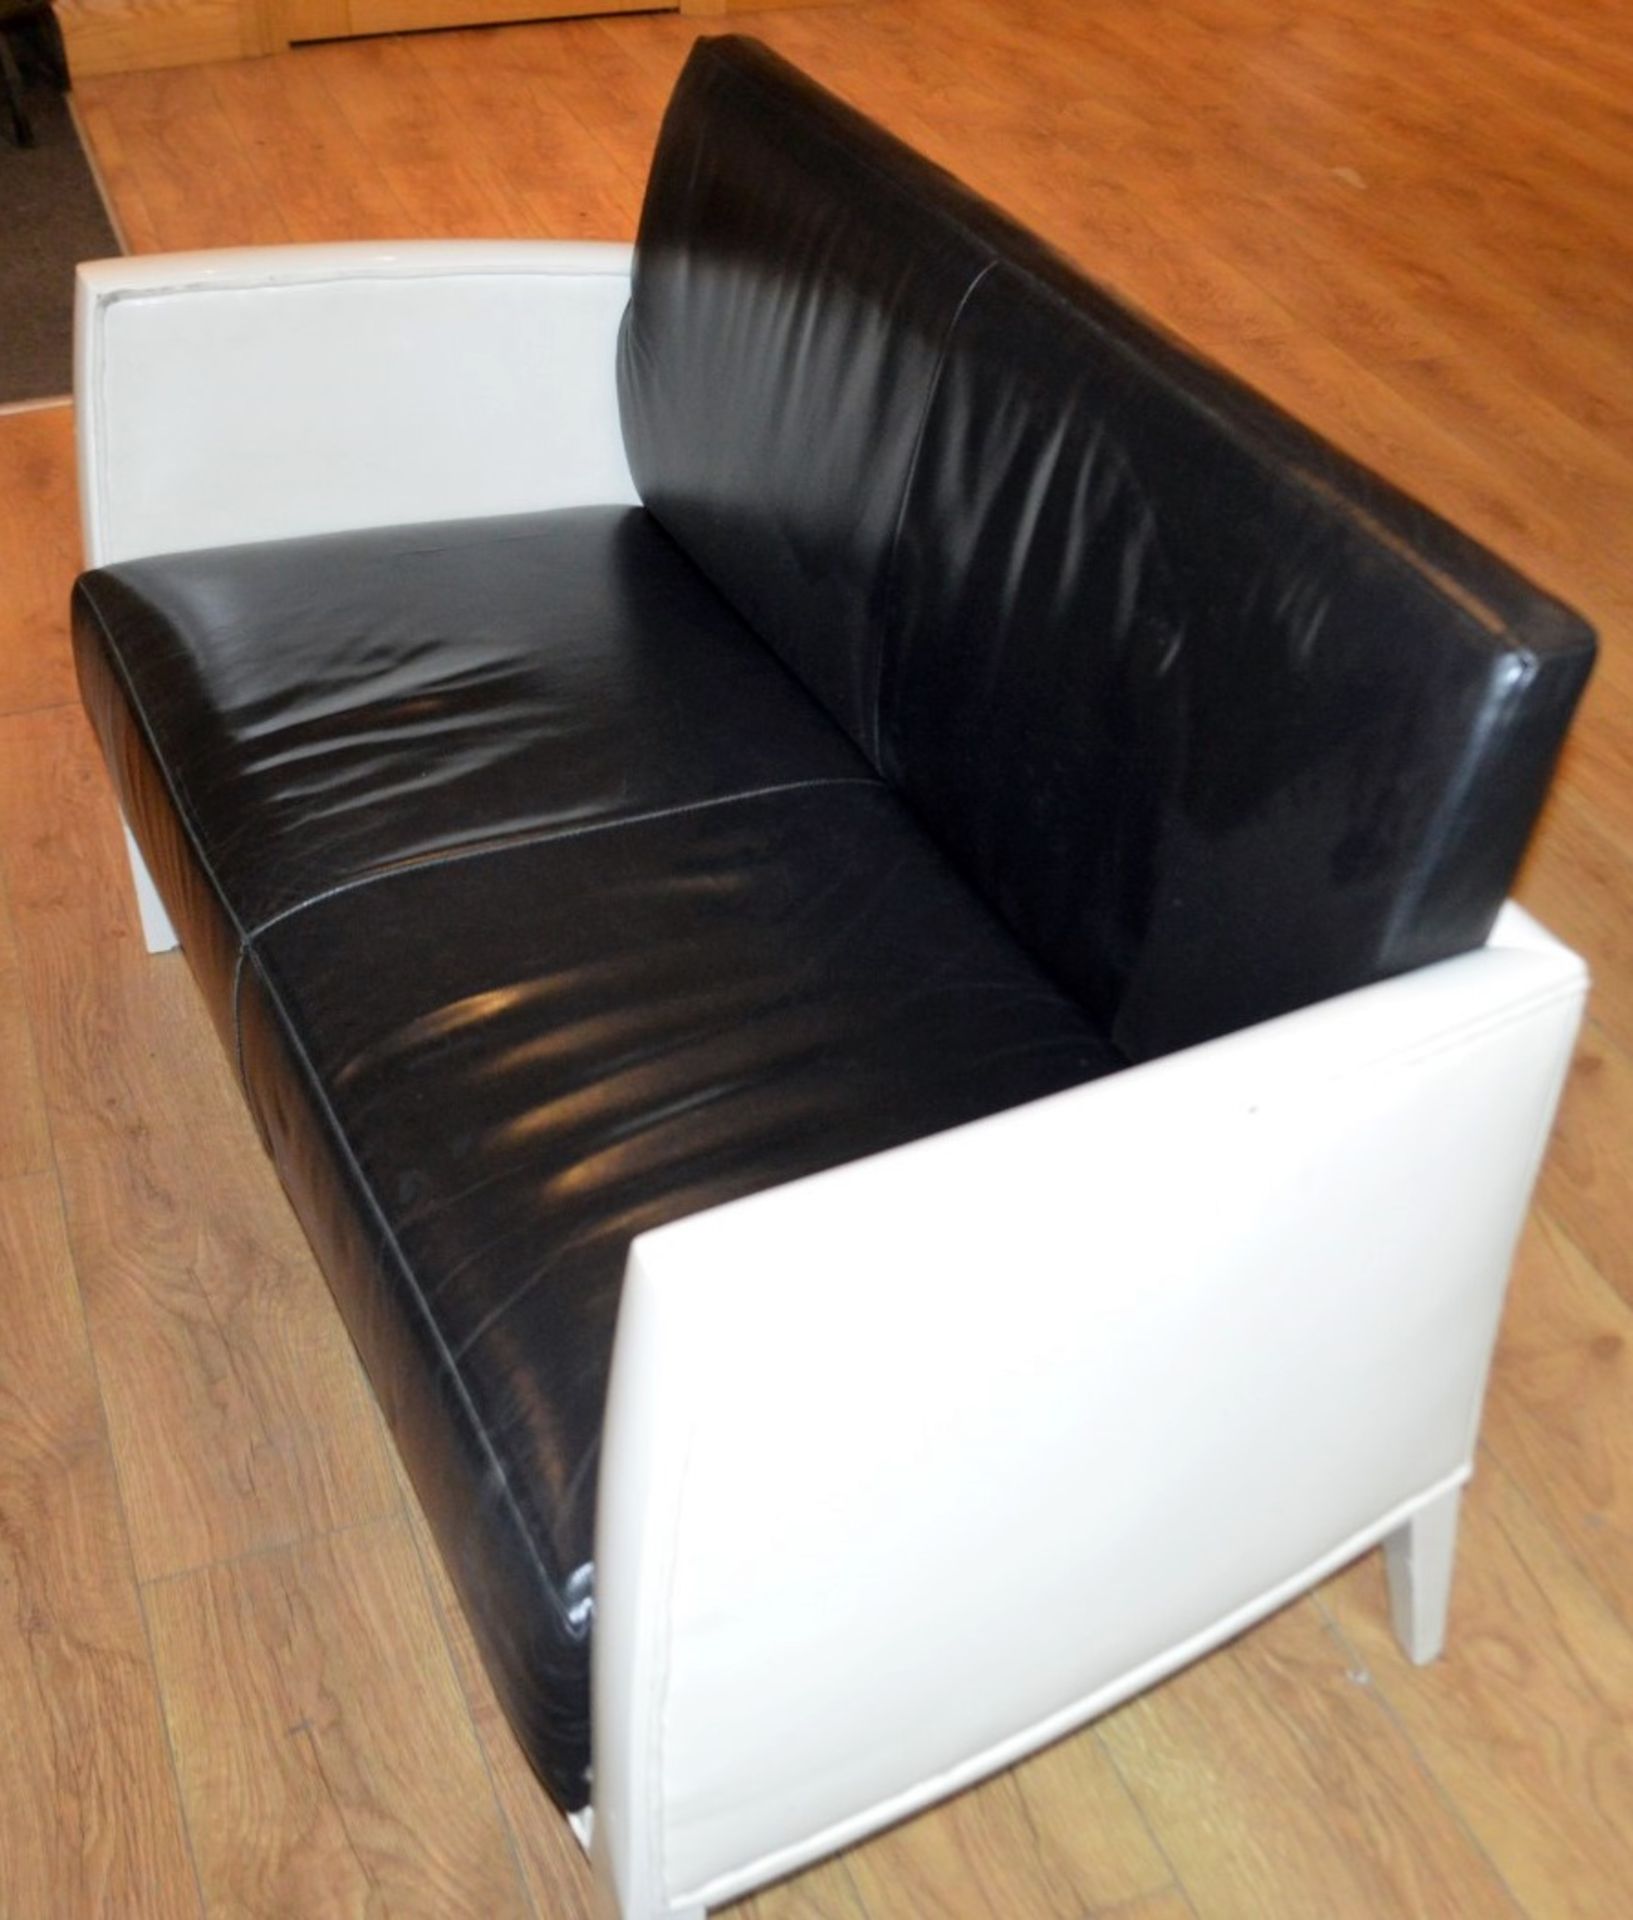 1 x Stylish Commercial Leather Upholstered 2-Seater Sofa With A High-Gloss Patent-Style Finish On - Image 6 of 7